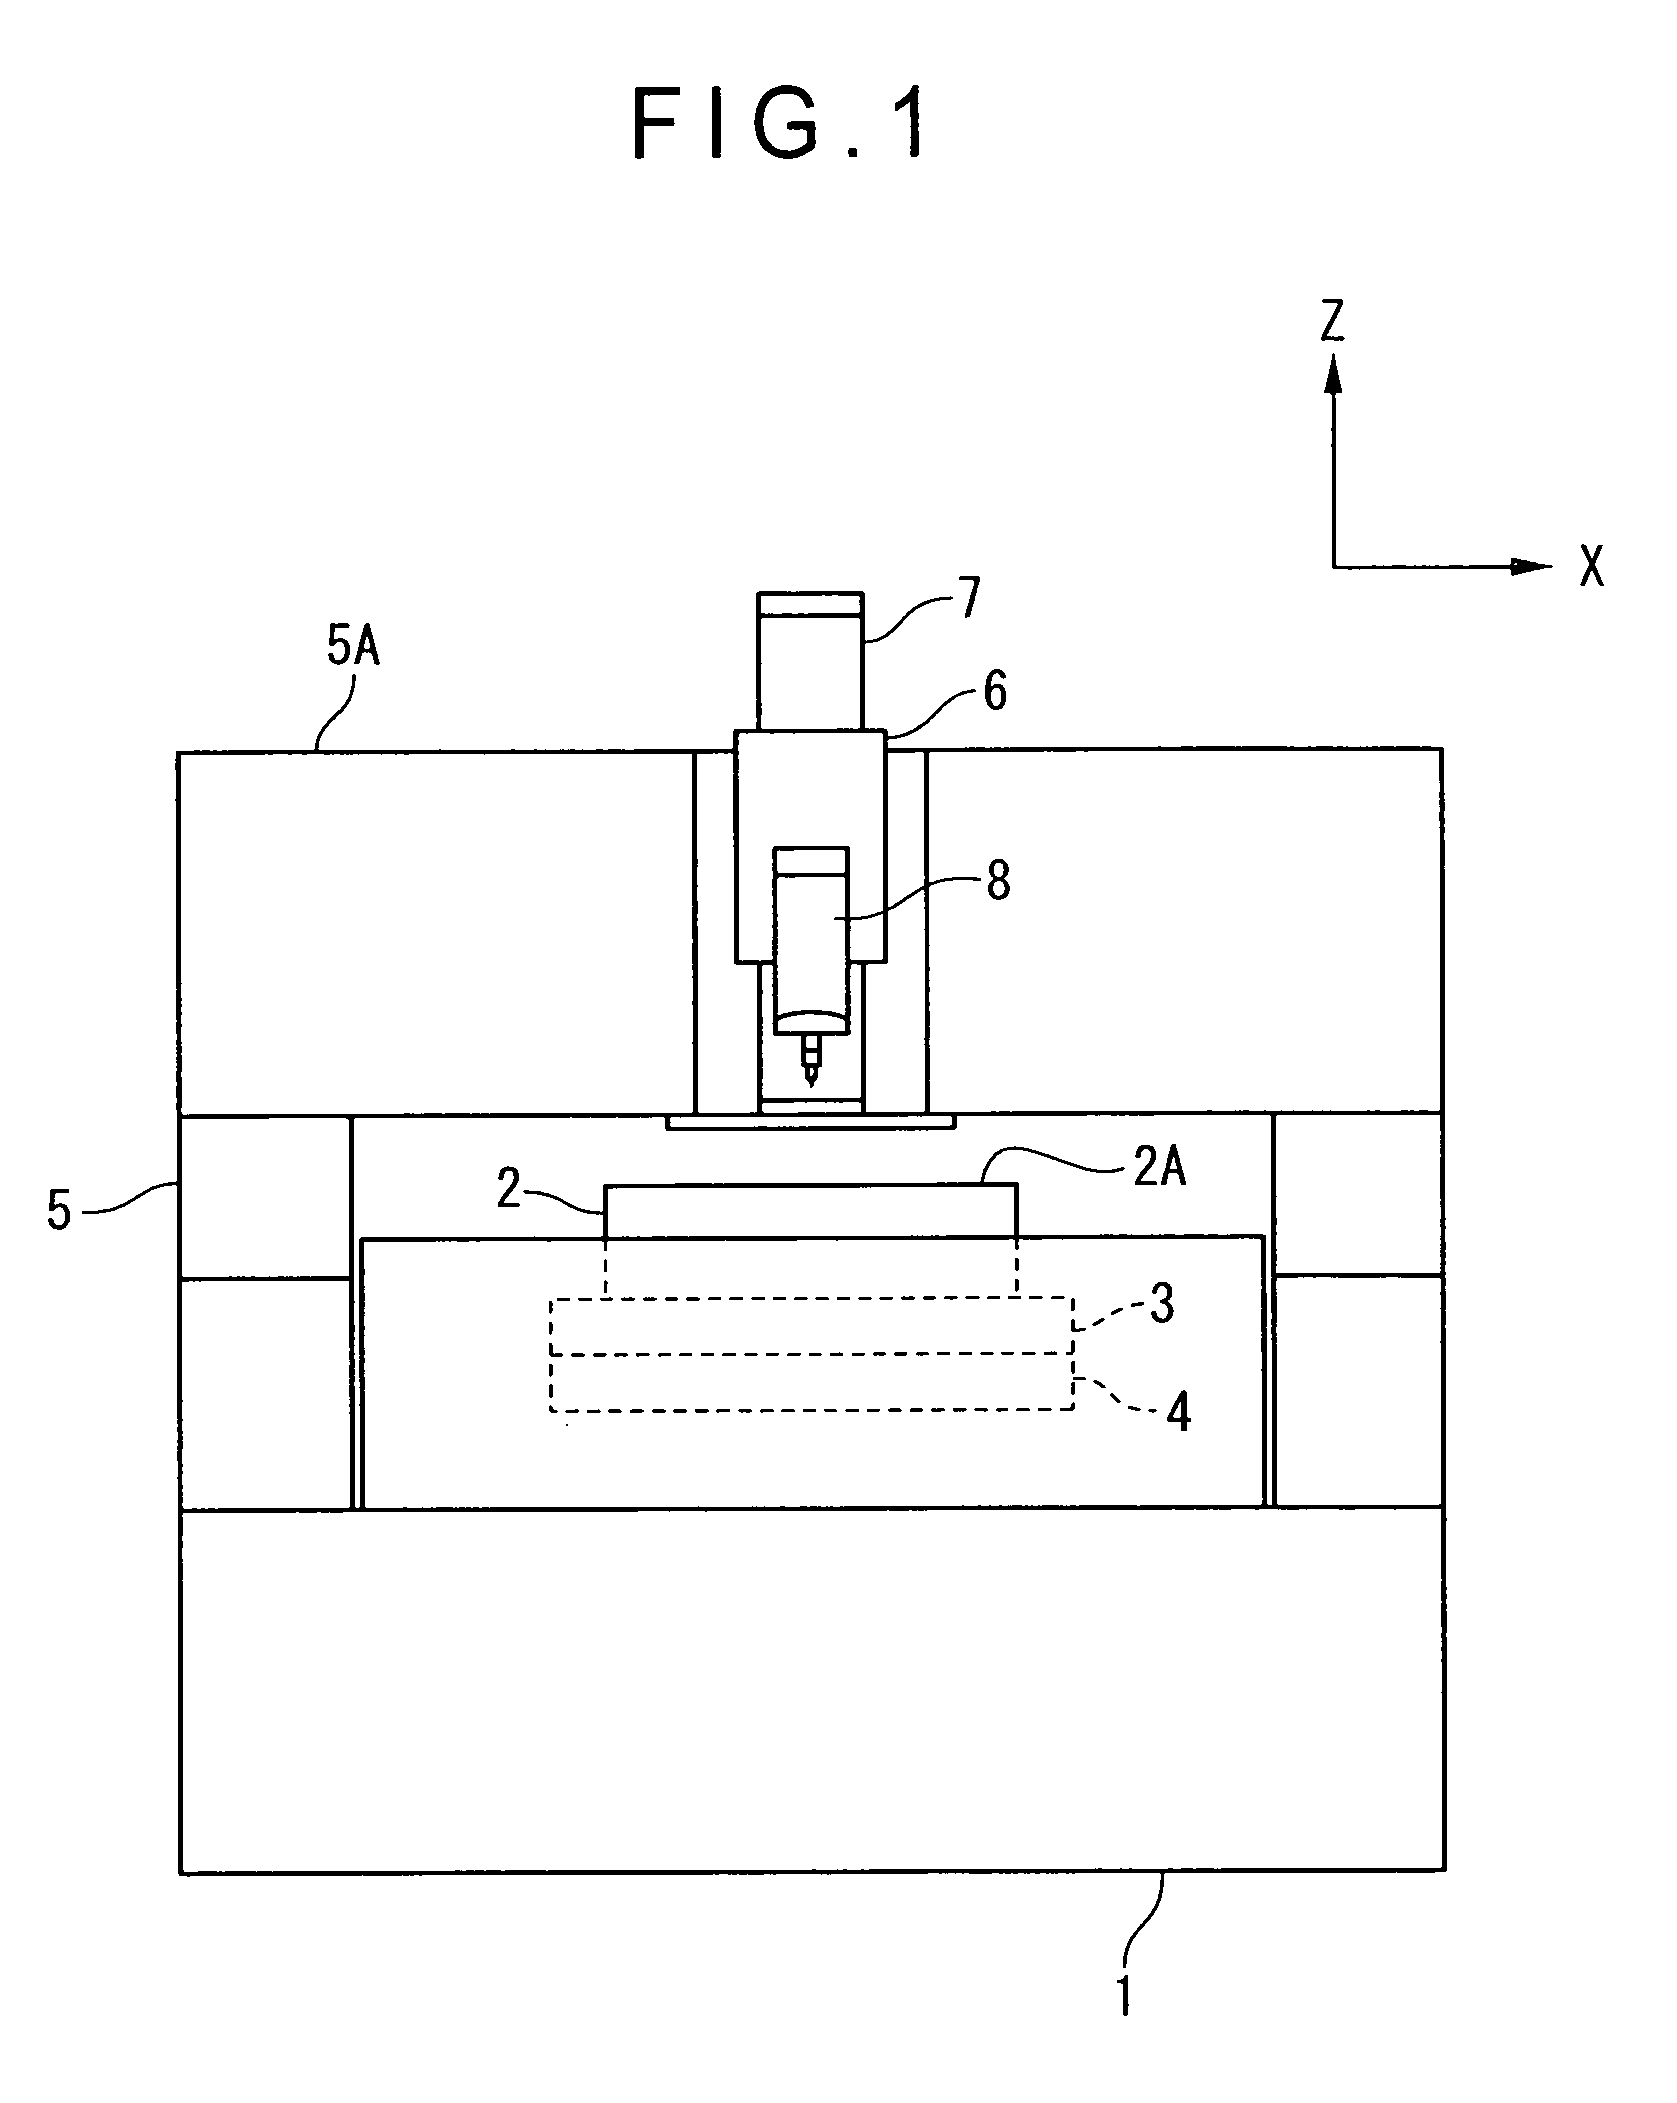 Method of measuring front and back surfaces of target object